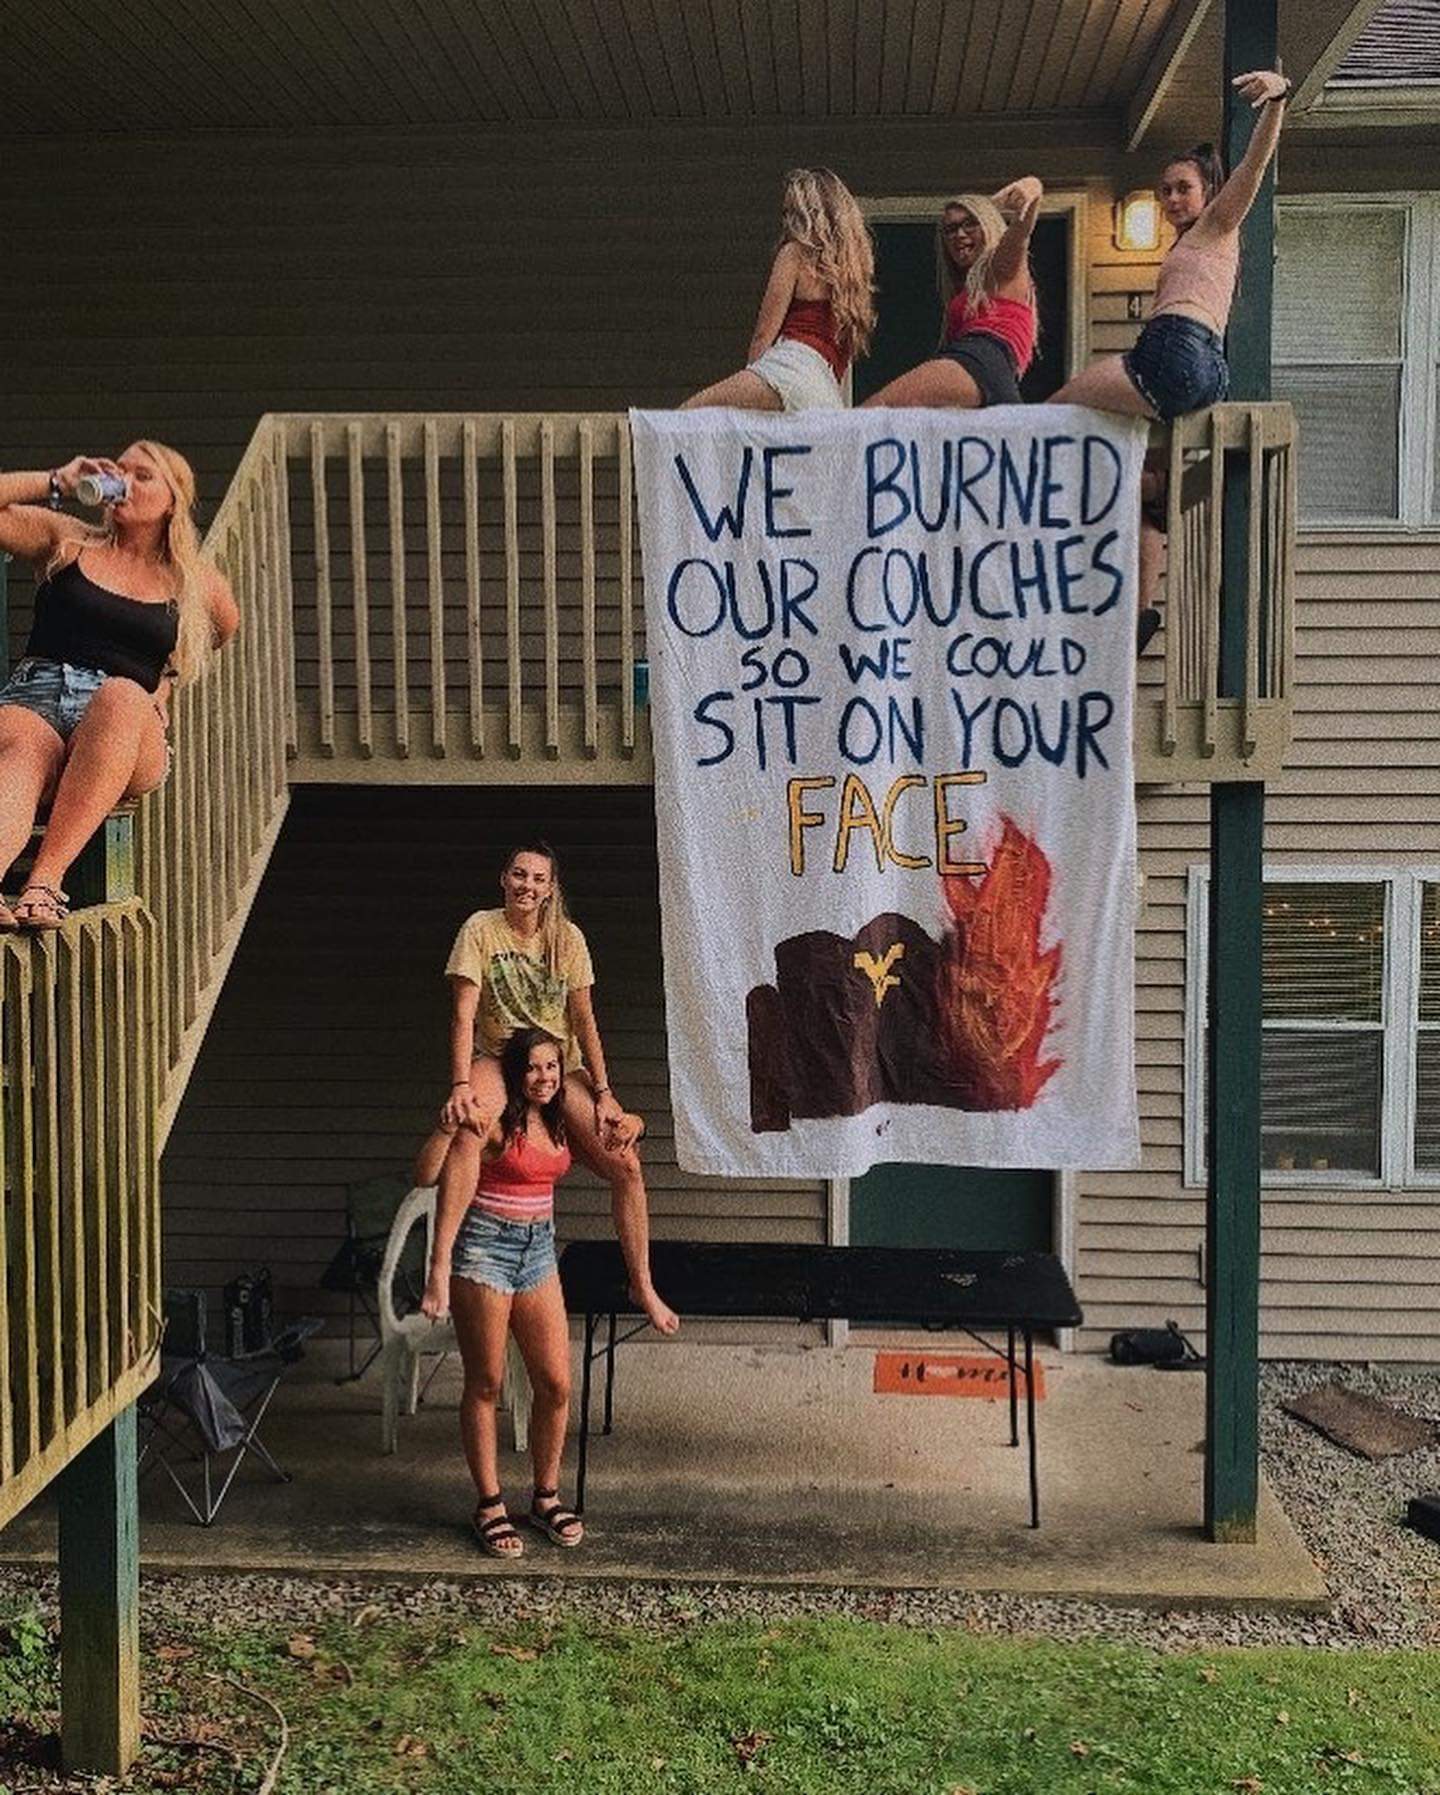 we burned our couches so we could sit on your face - Je Burned Our Couches 50 We Could Sit On Your Fac